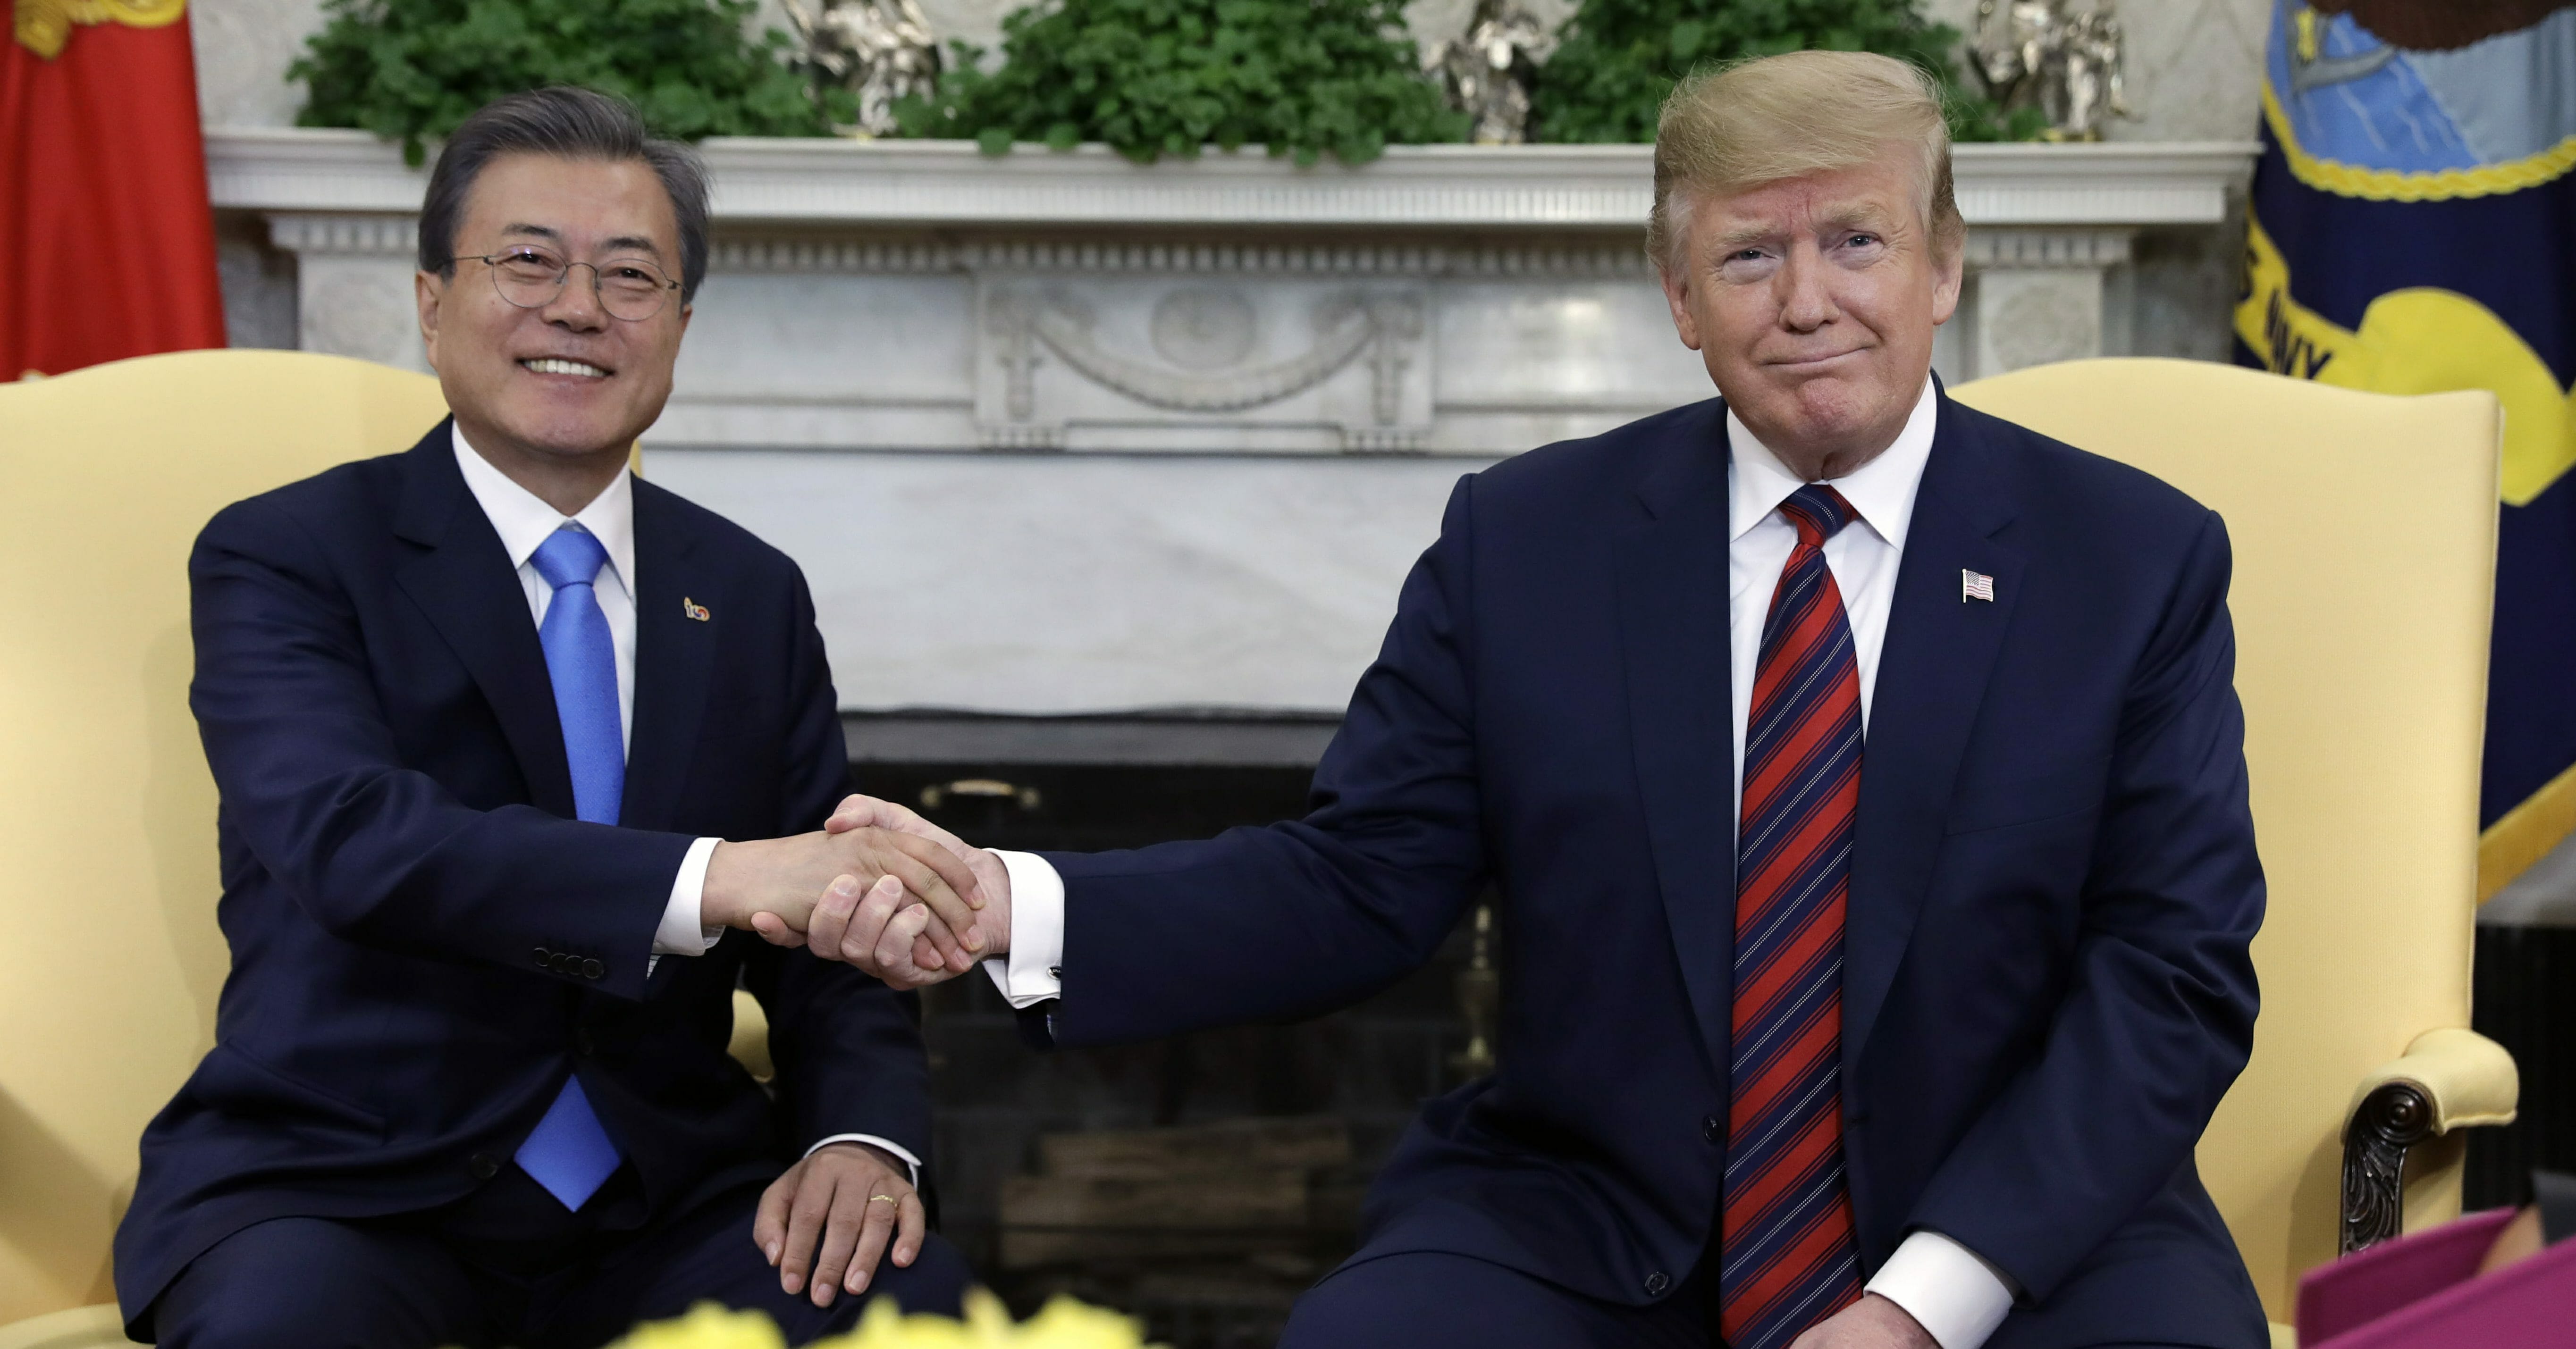 President Donald Trump meets with South Korean President Moon Jae-in at the White House on Thursday, April 11, 2019, in Washington.